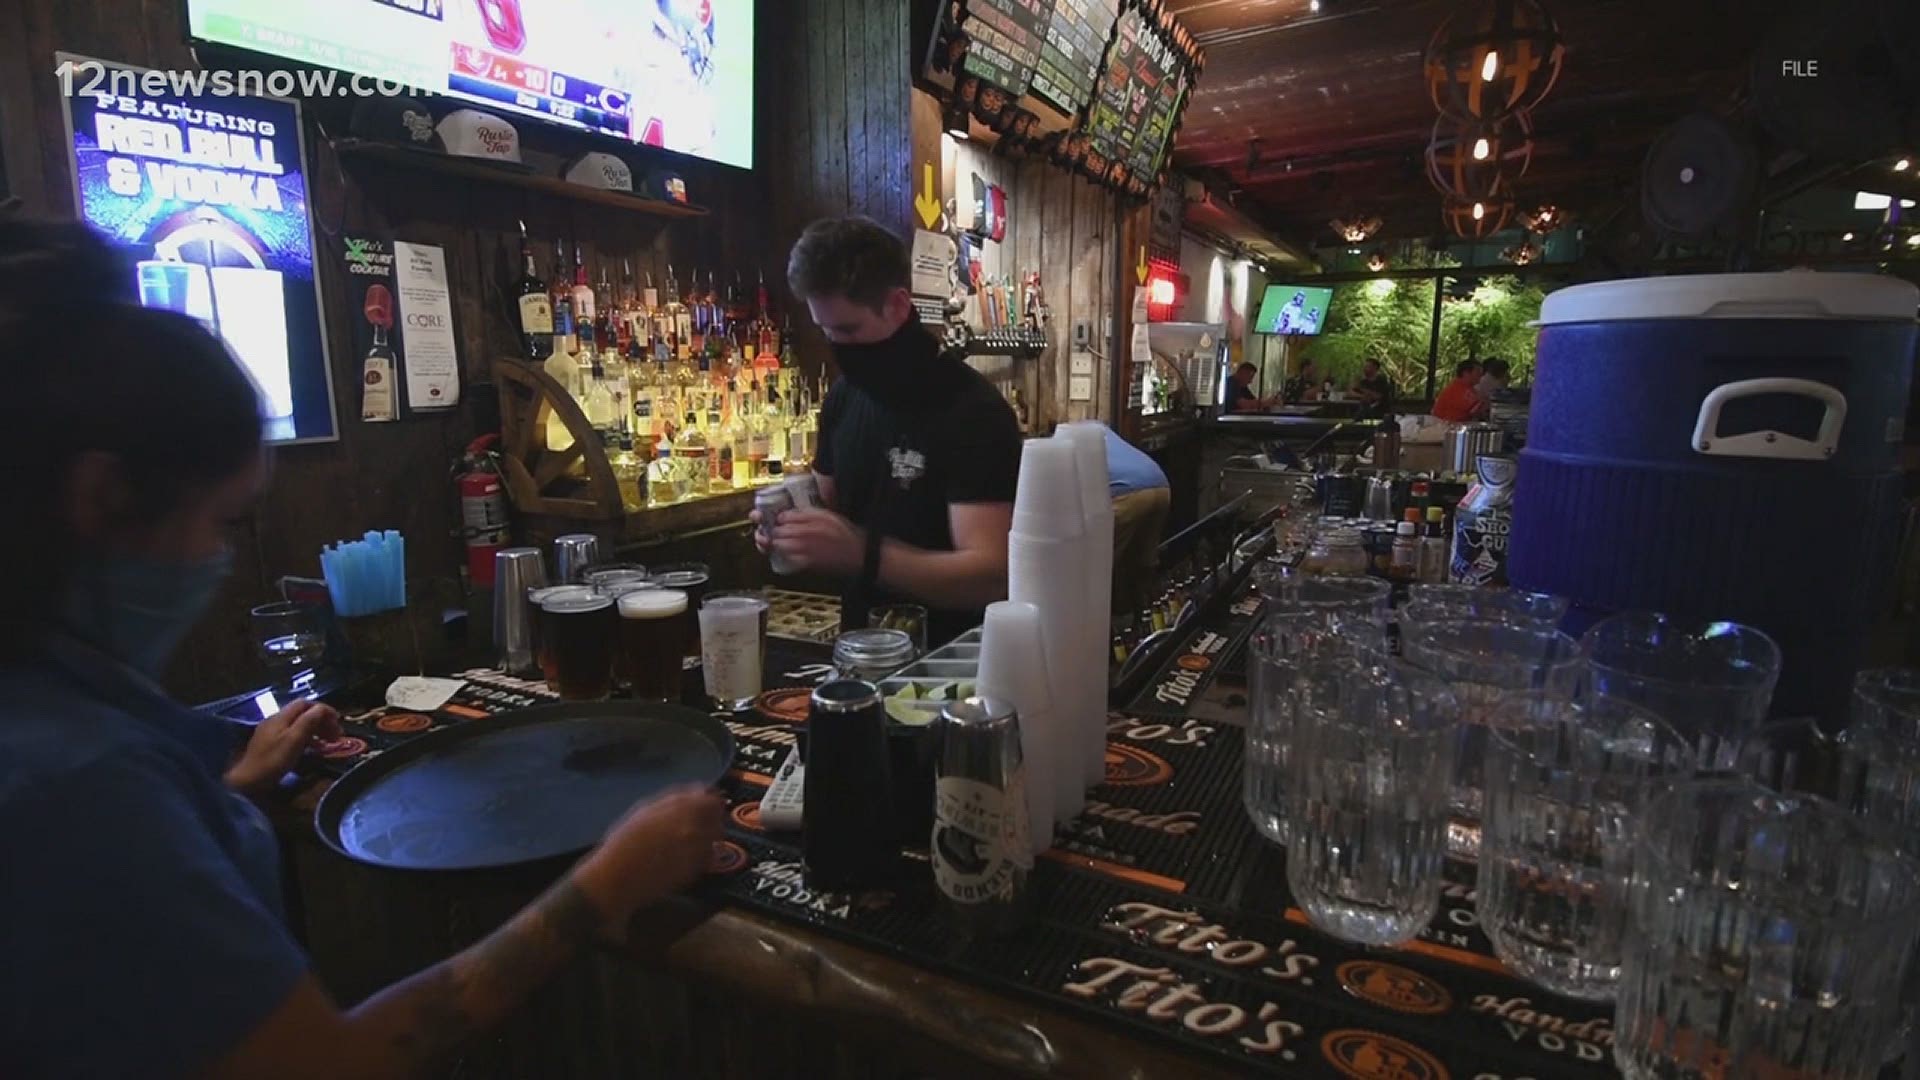 From June 18 to Oct. 29, the Texas Alcoholic Beverage Commission (TABC) inspected 23,801 establishments serving alcohol.